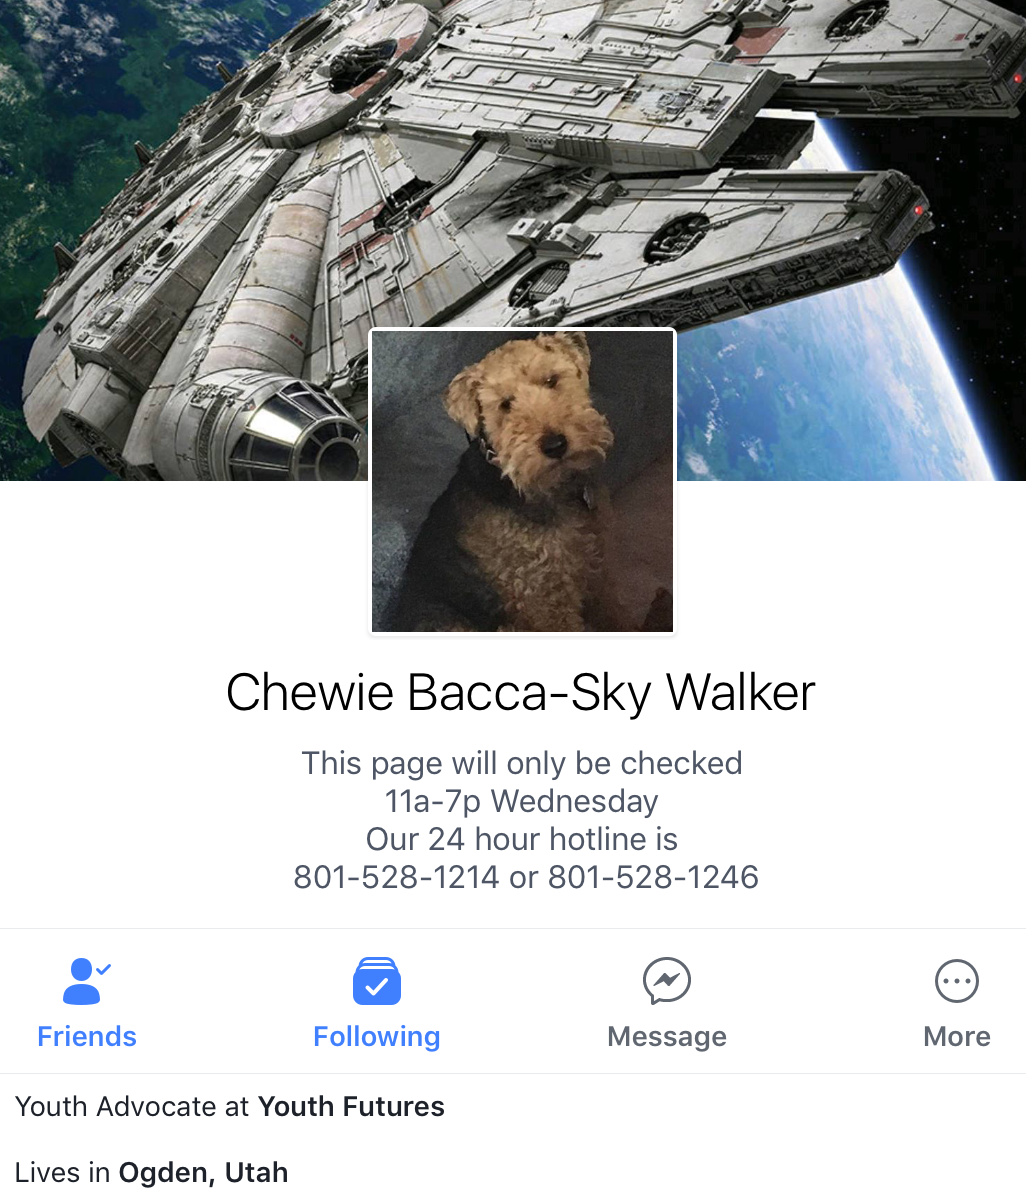 Watch for daily Facebook Posts from Chewie Bacca-Sky Walker